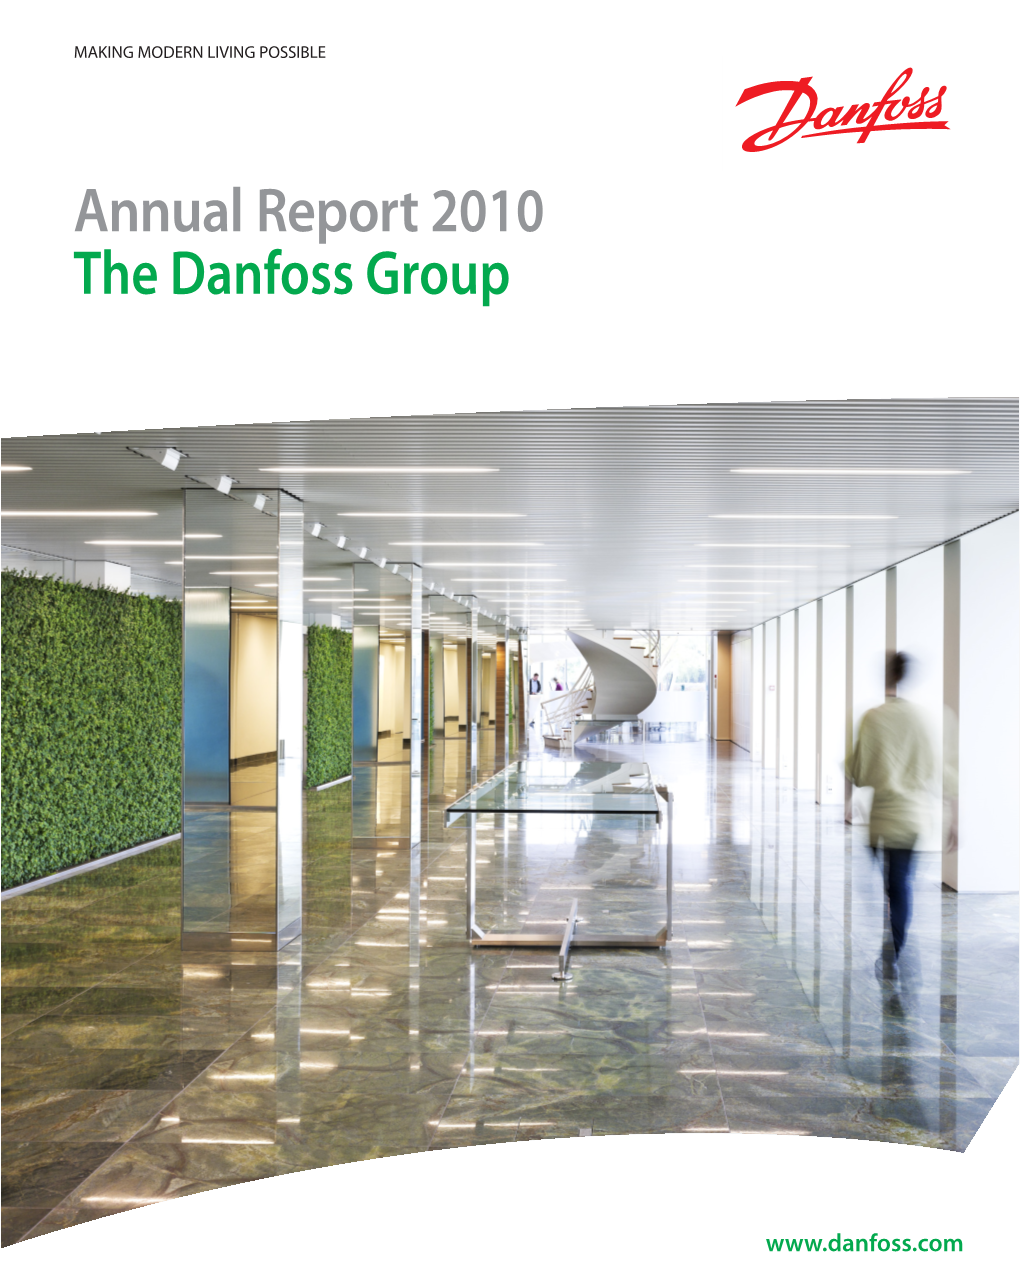 Annual Report 2010 the Danfoss Group